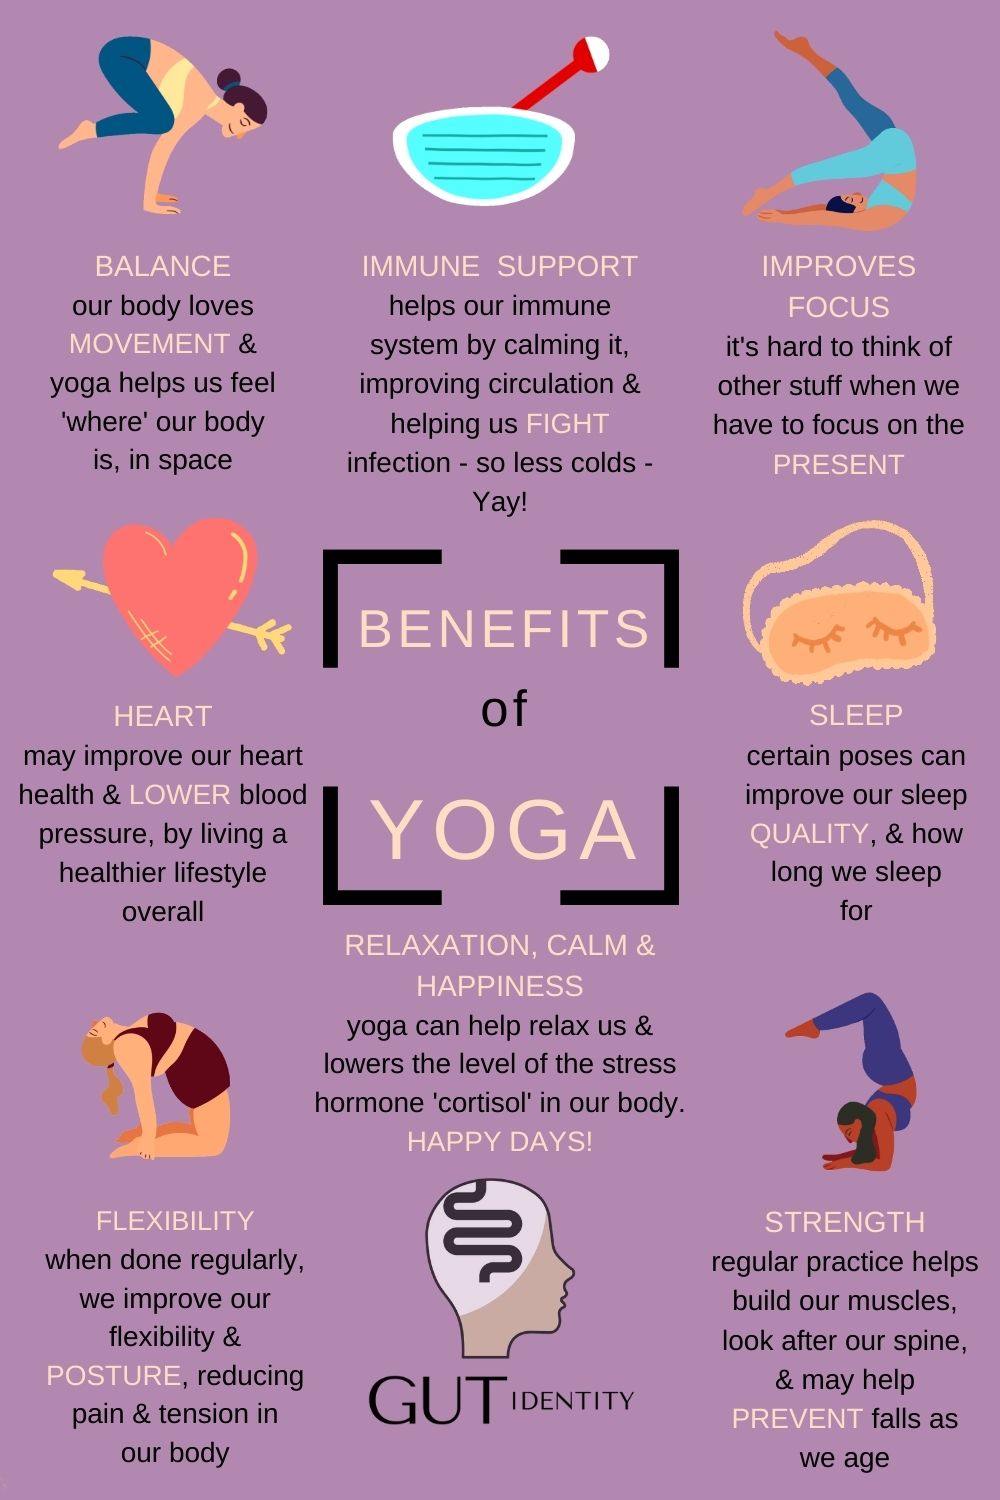 The Benefits of Yoga by Gutidentity